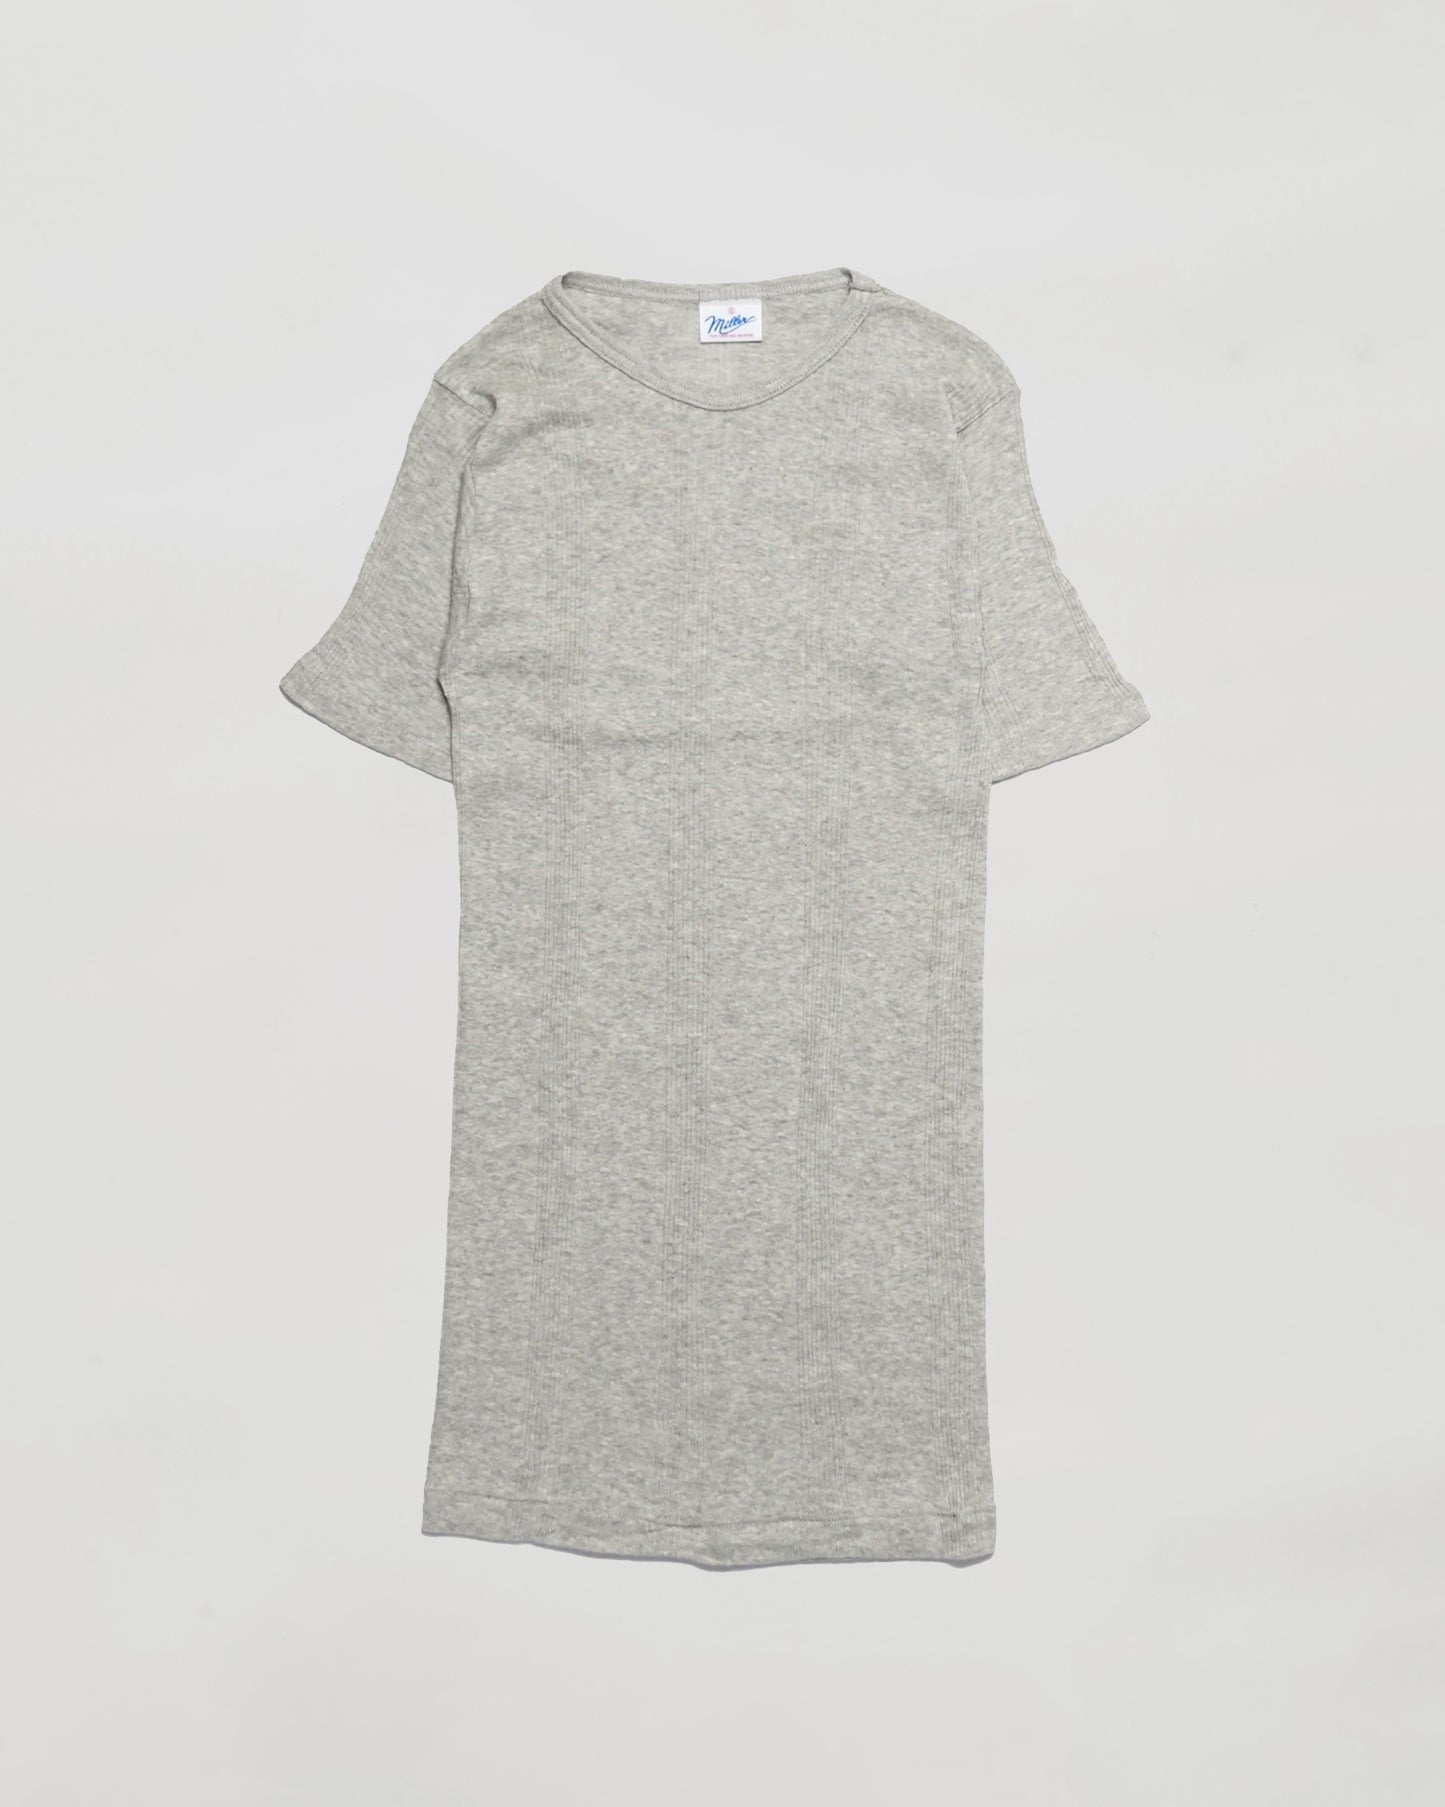 N.O.S Miller Tee Gray Made In USA